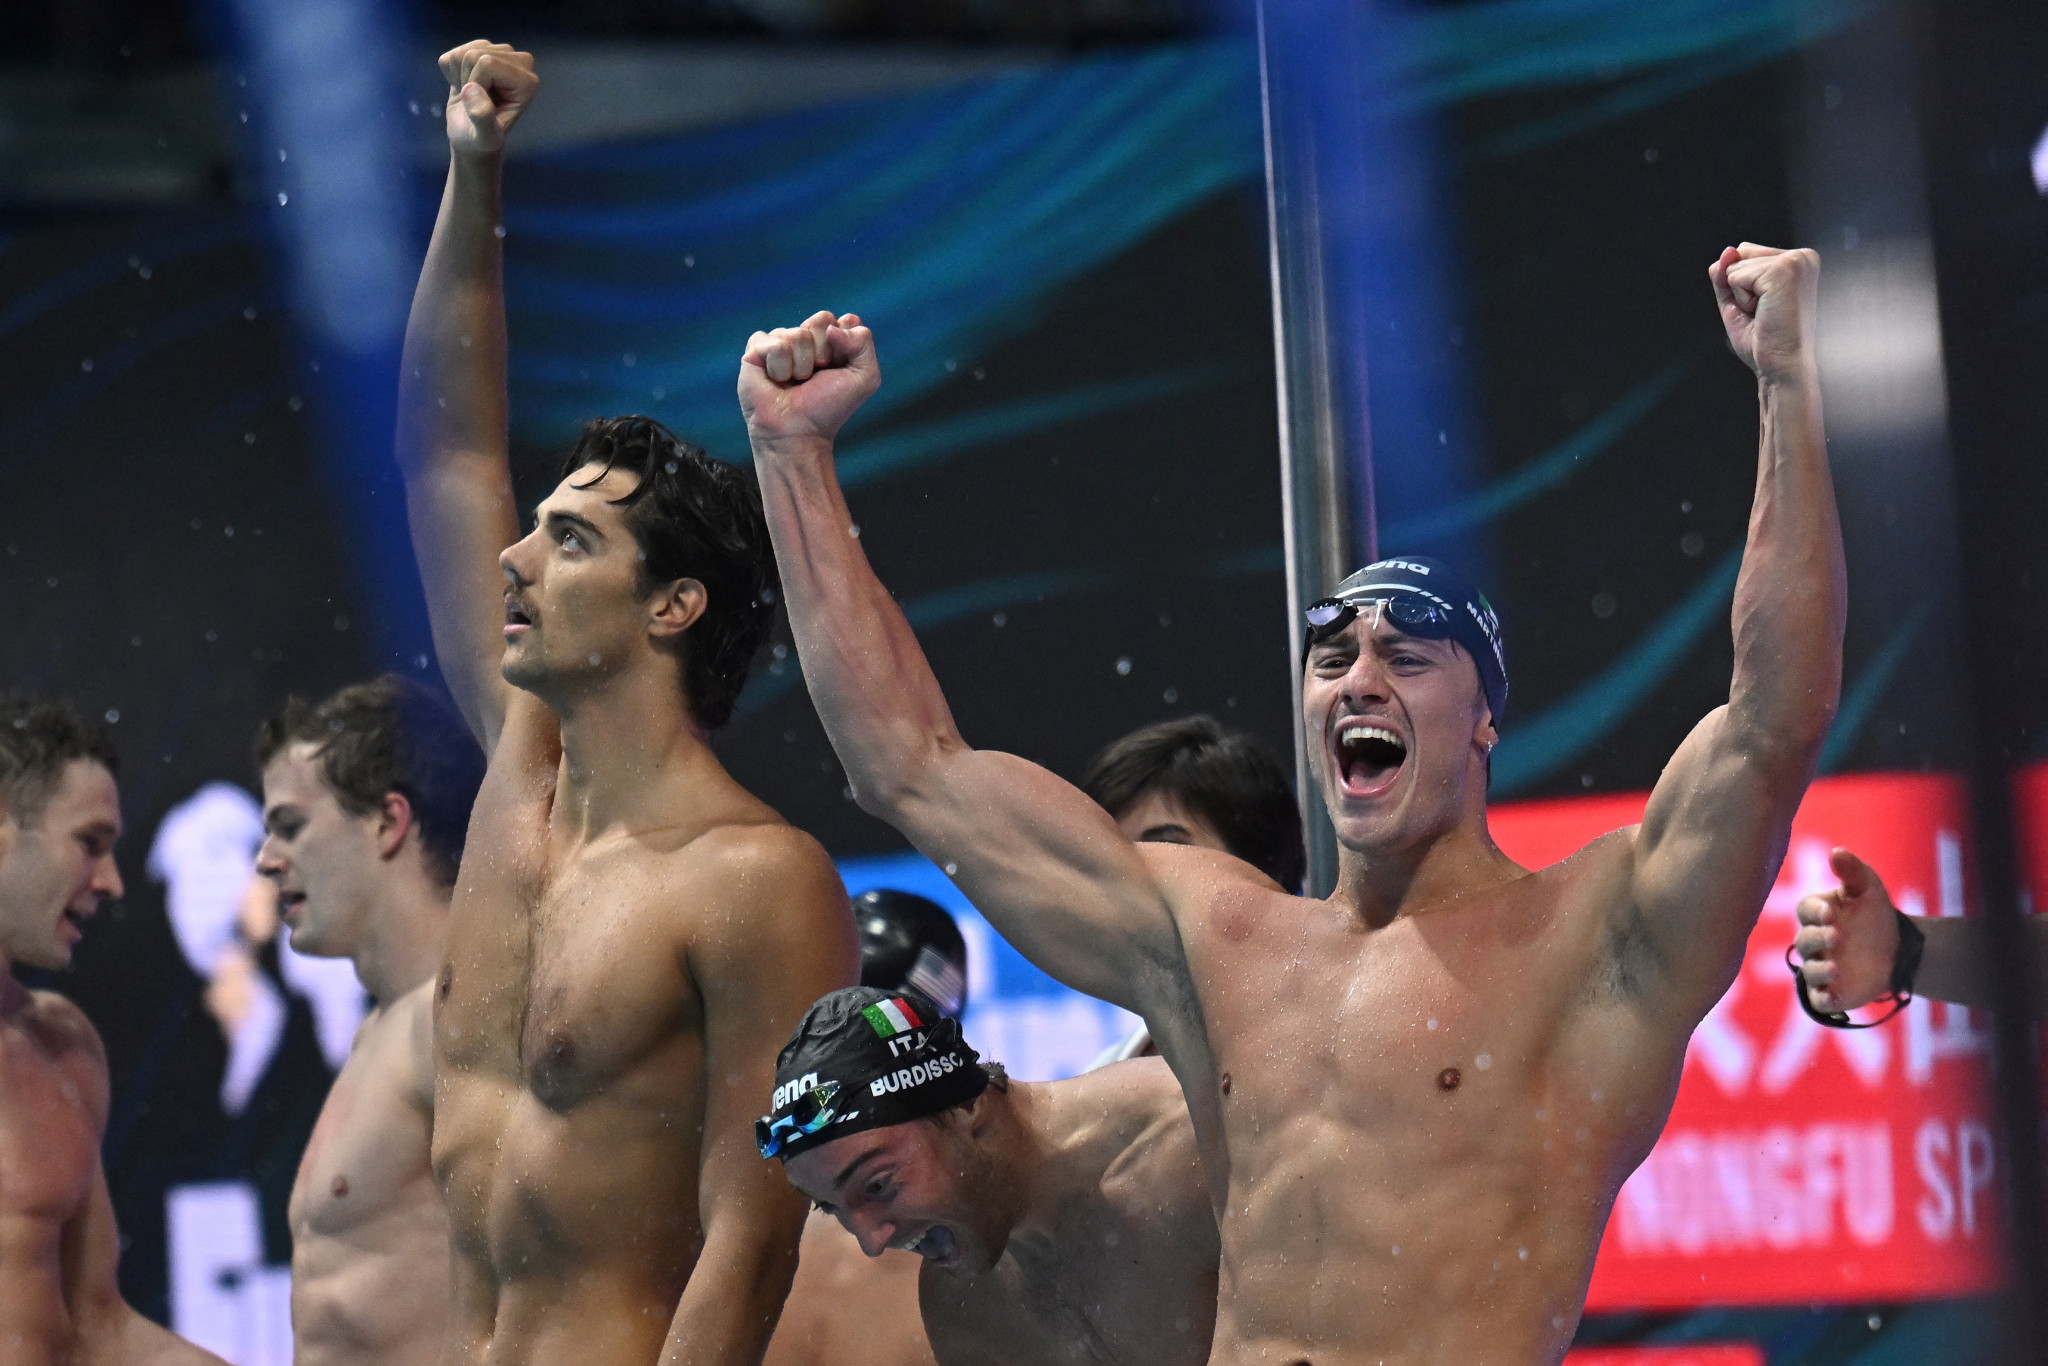 Italy's men's 4x100m medley relay success was a first relay gold medal at the World Championships ©Getty Images